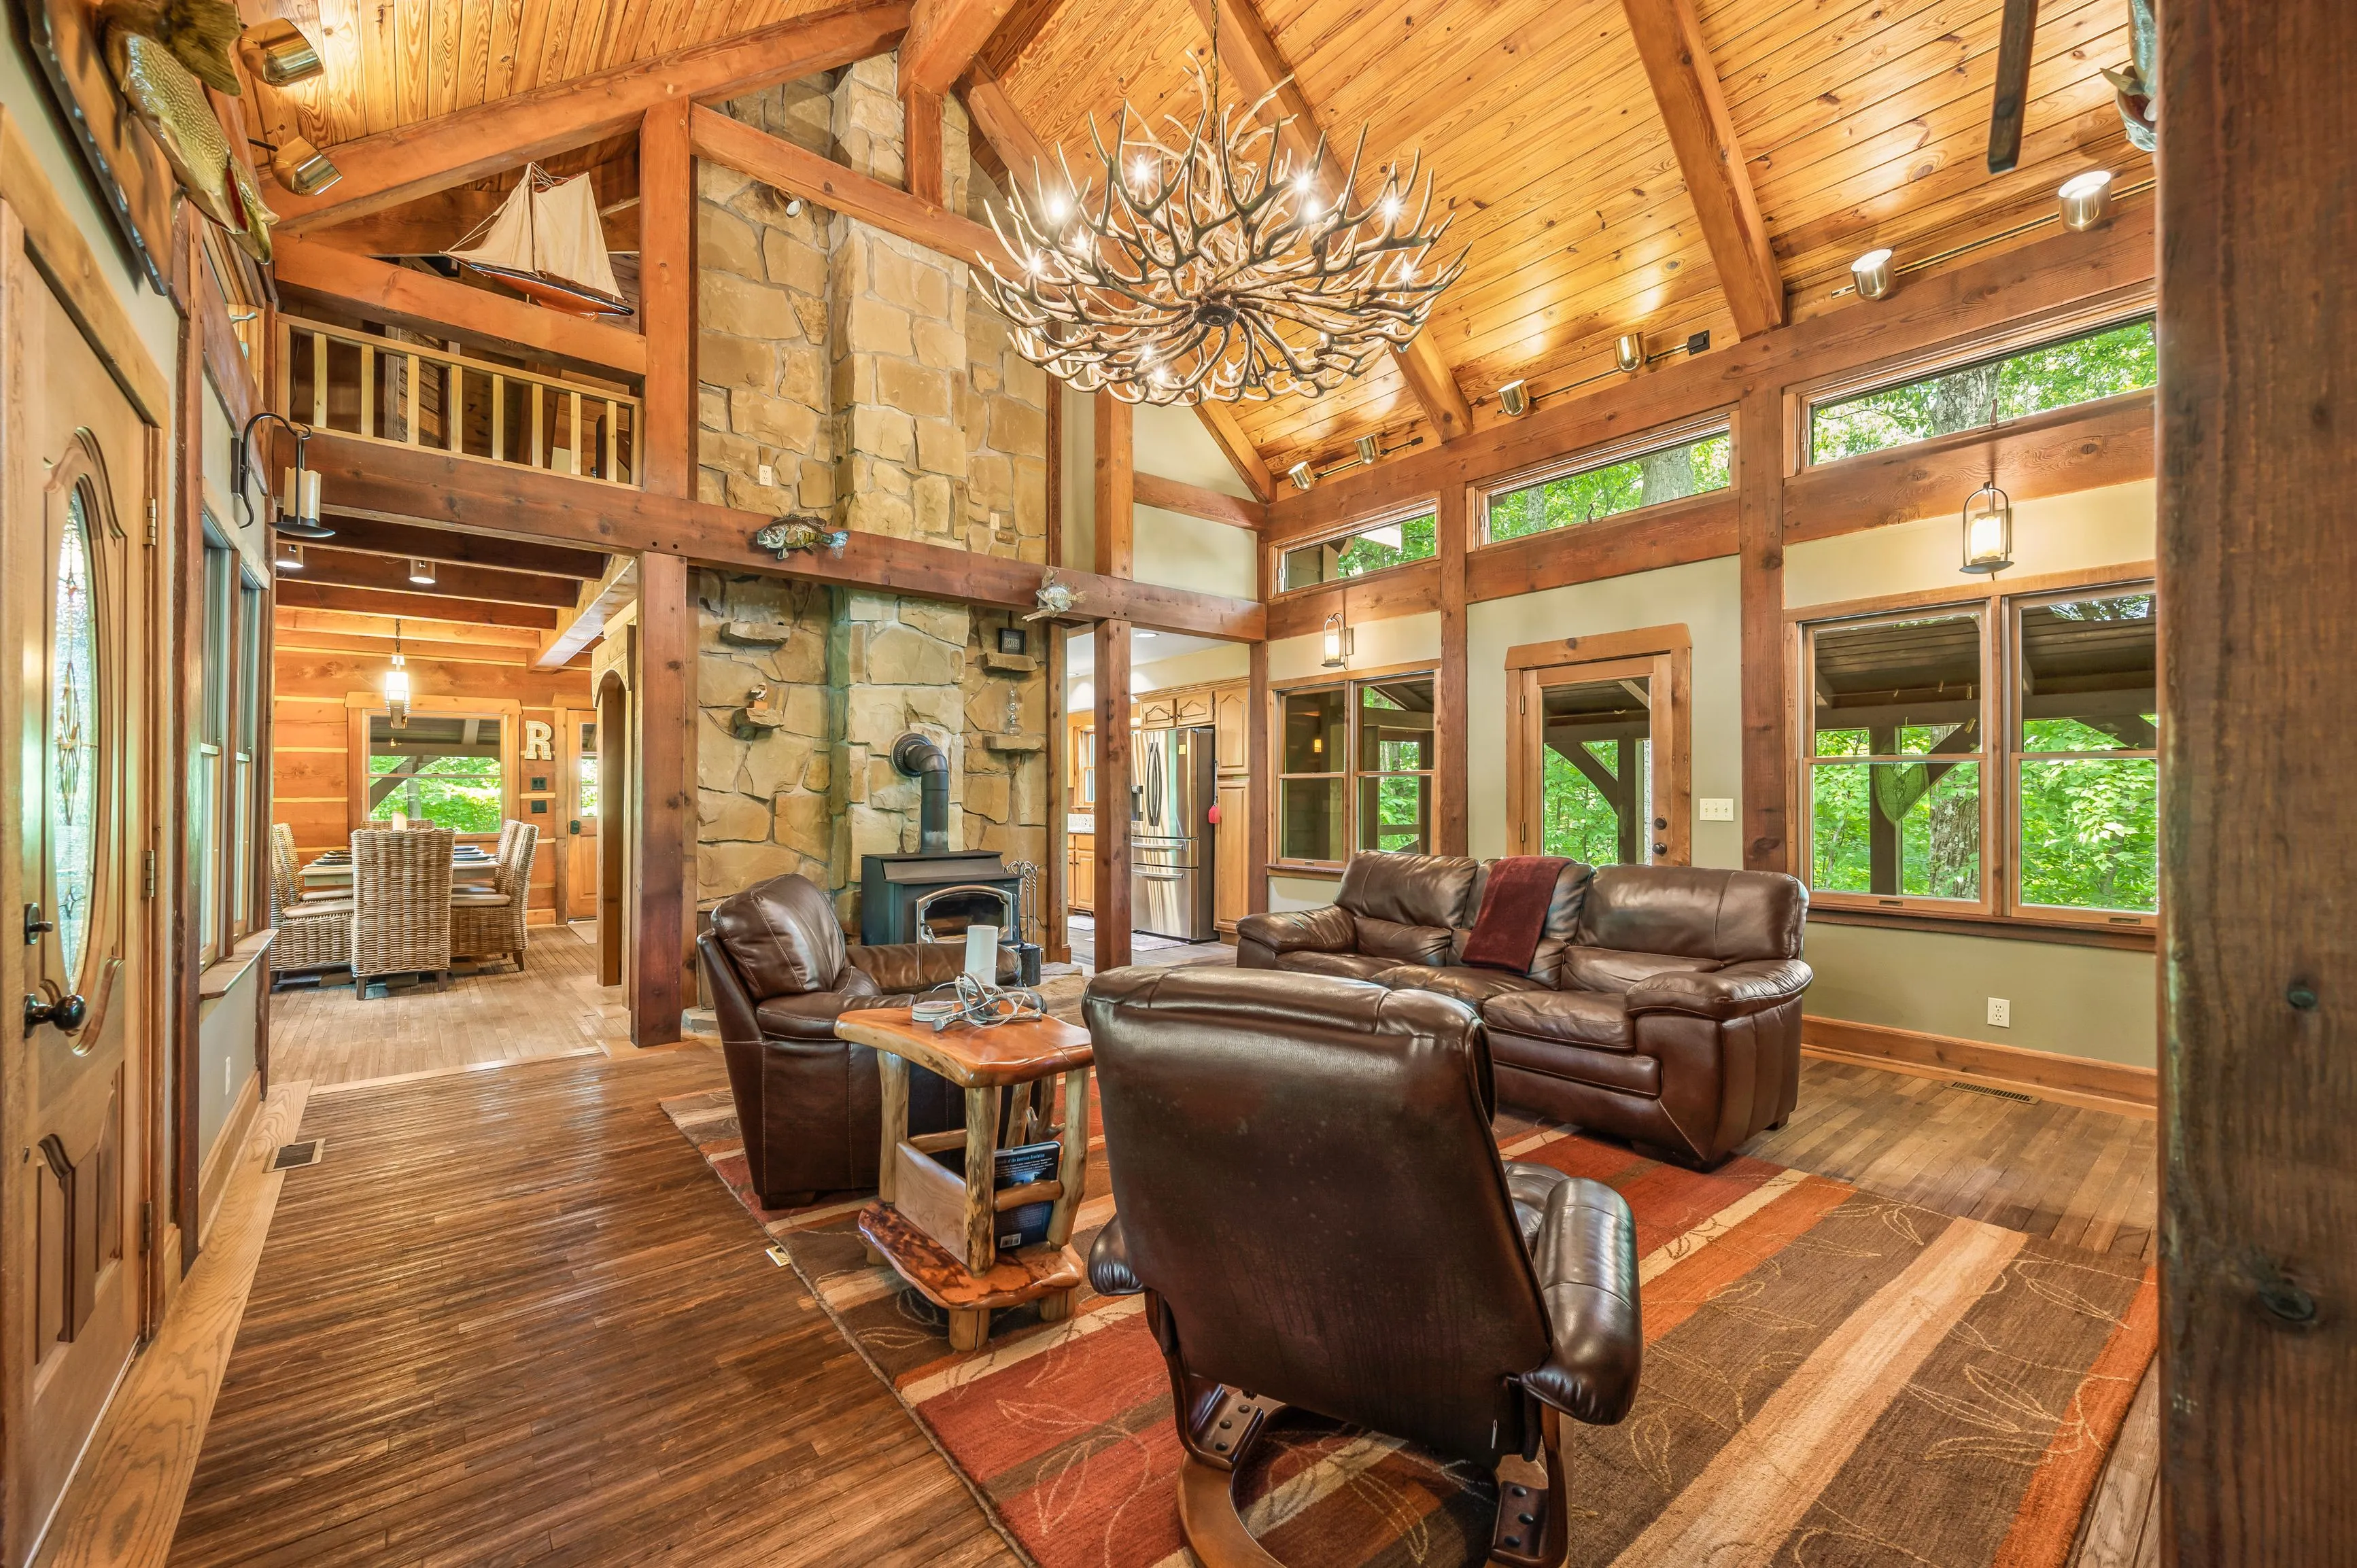 Spacious and cozy rustic living room interior with high vaulted ceiling, leather furniture, stone fireplace with a wood-burning stove, antler chandelier, and large windows overlooking greenery.